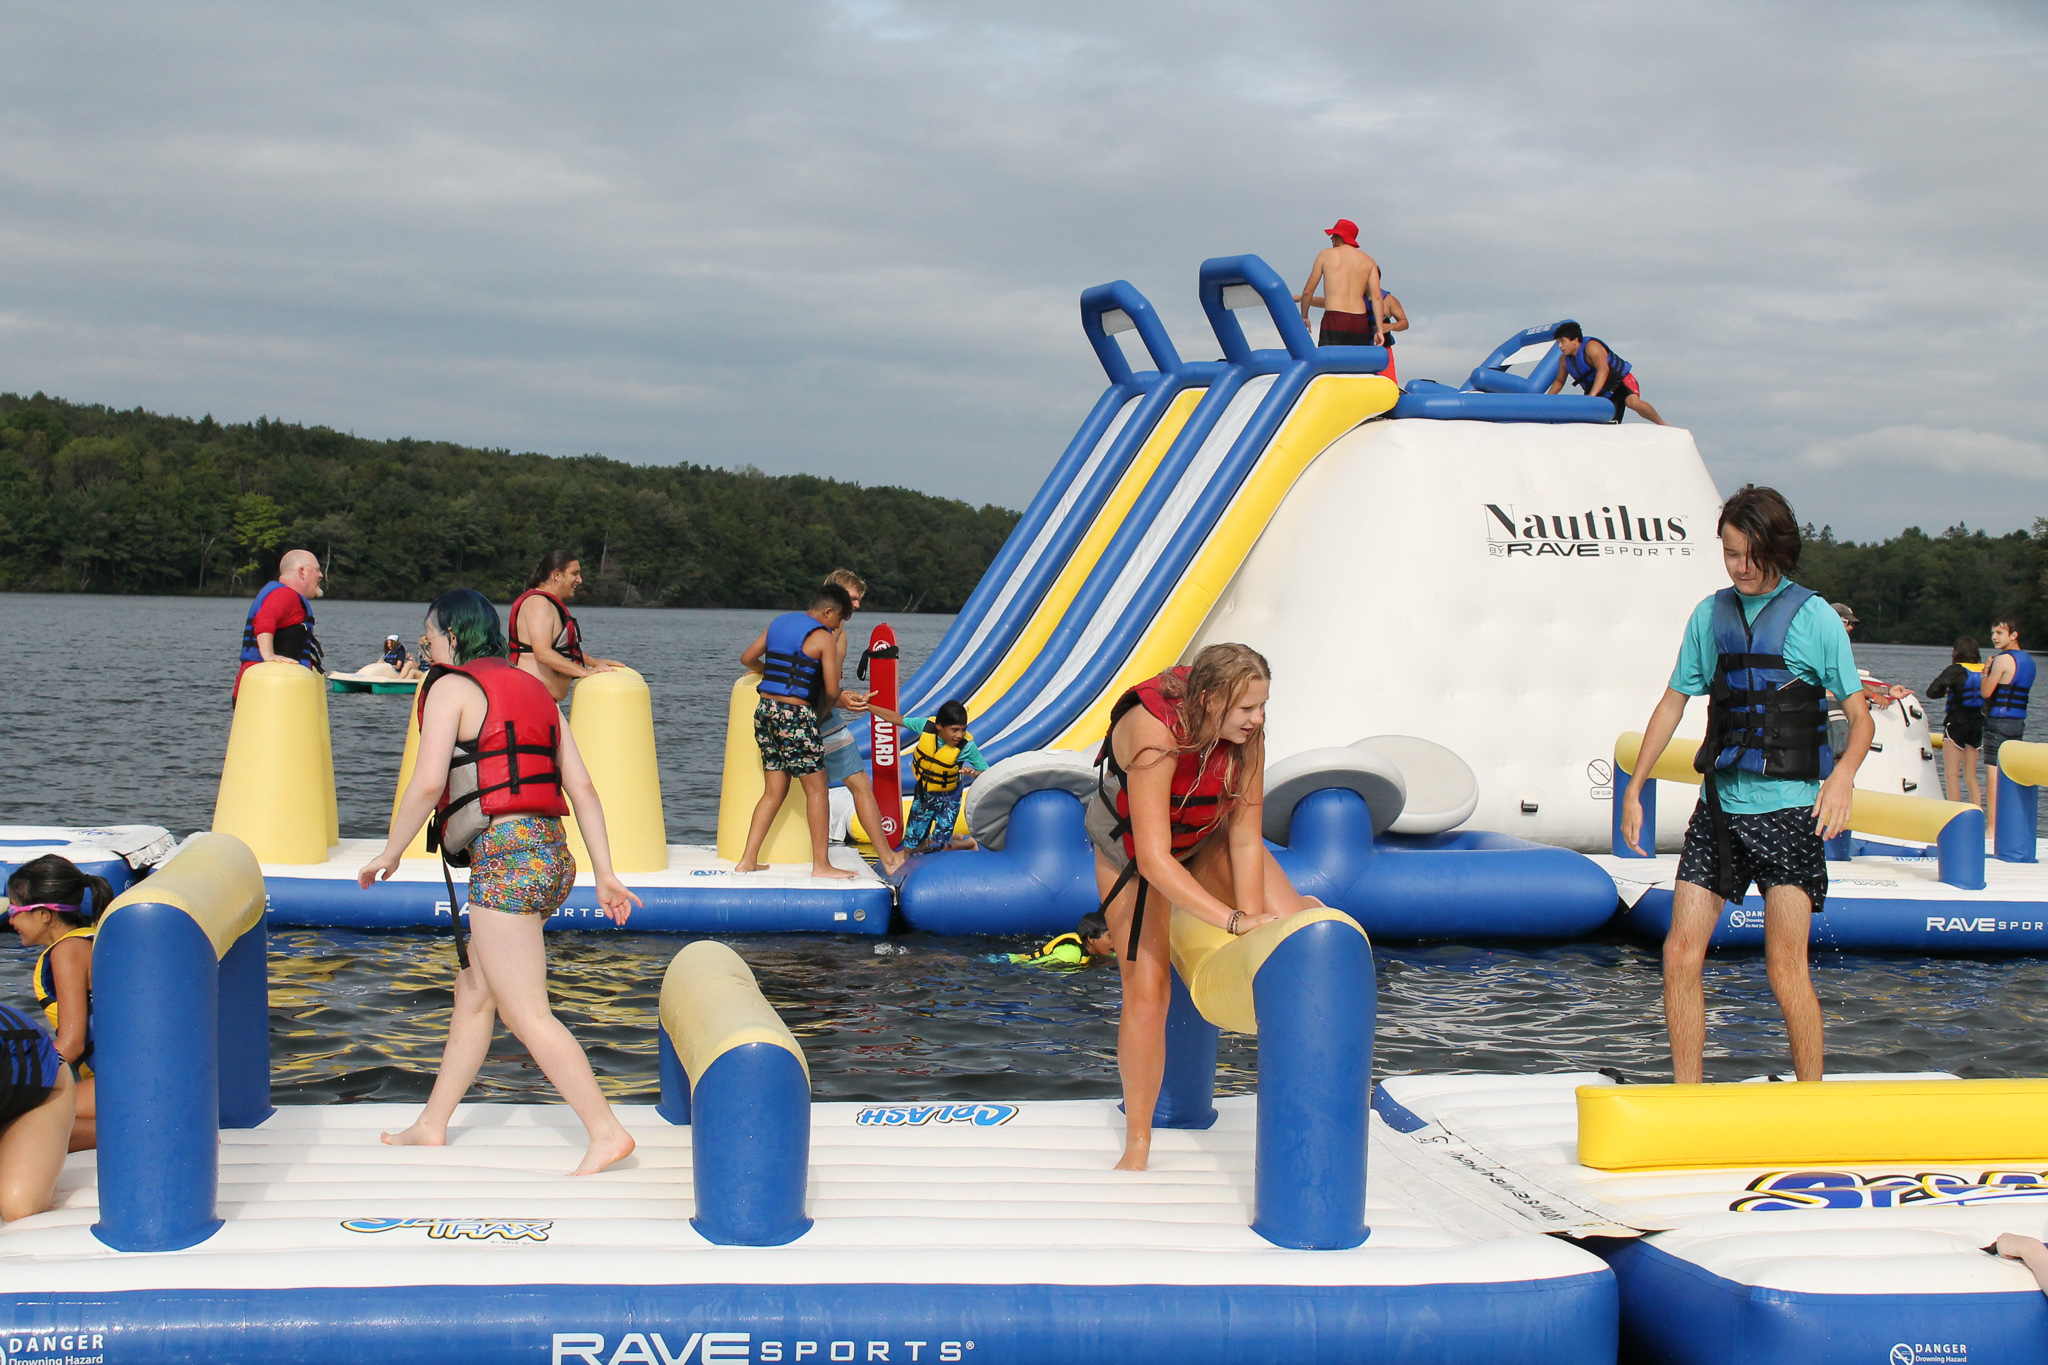 Campers climbing on inflatables in the lake